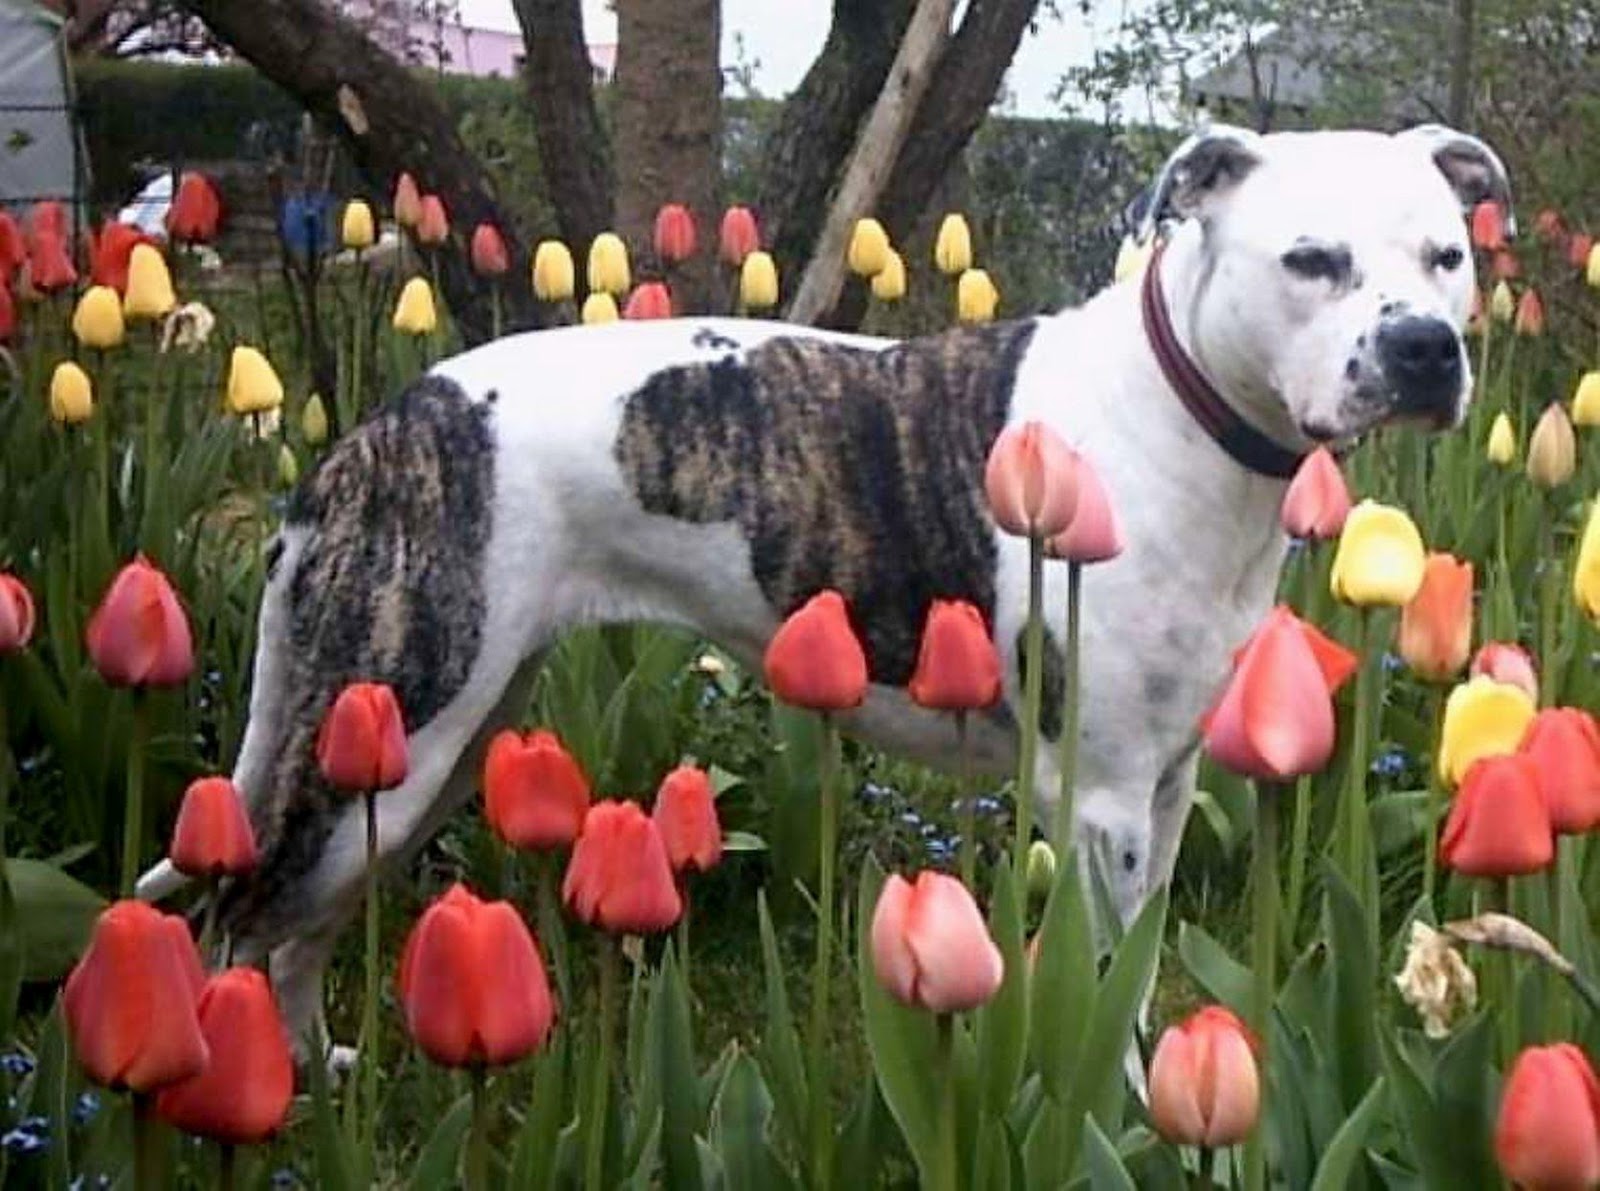 9 Amazing American Staffordshire Terrier Wallpapers